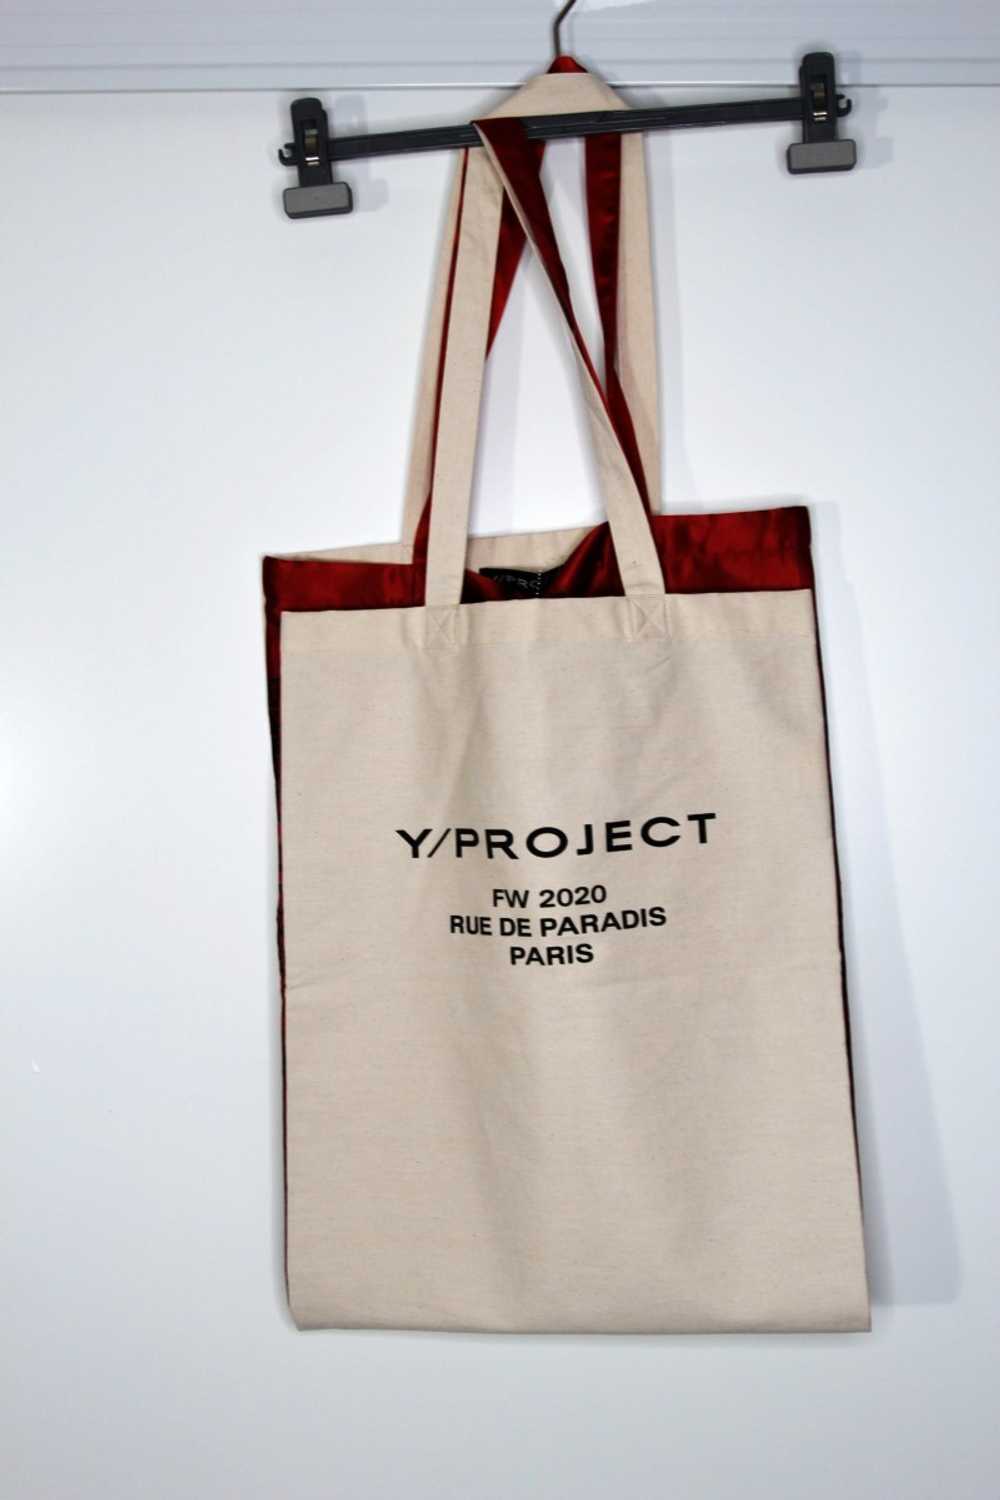 BNWT AW20 Y/PROJECT SCARF TOTE BAG - image 8